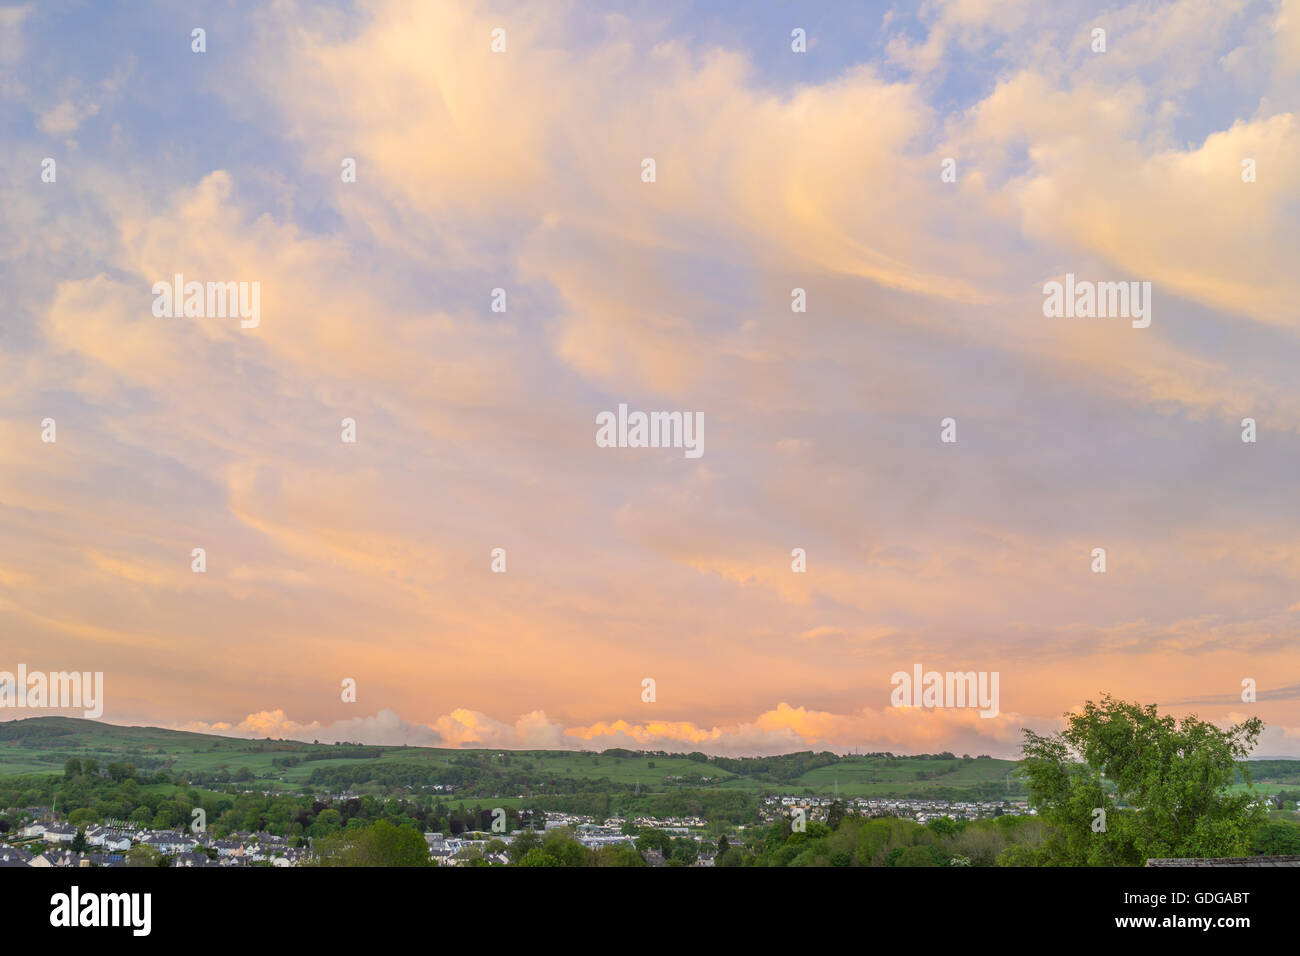 An evening view over Kendal looking across the valley. Stock Photo